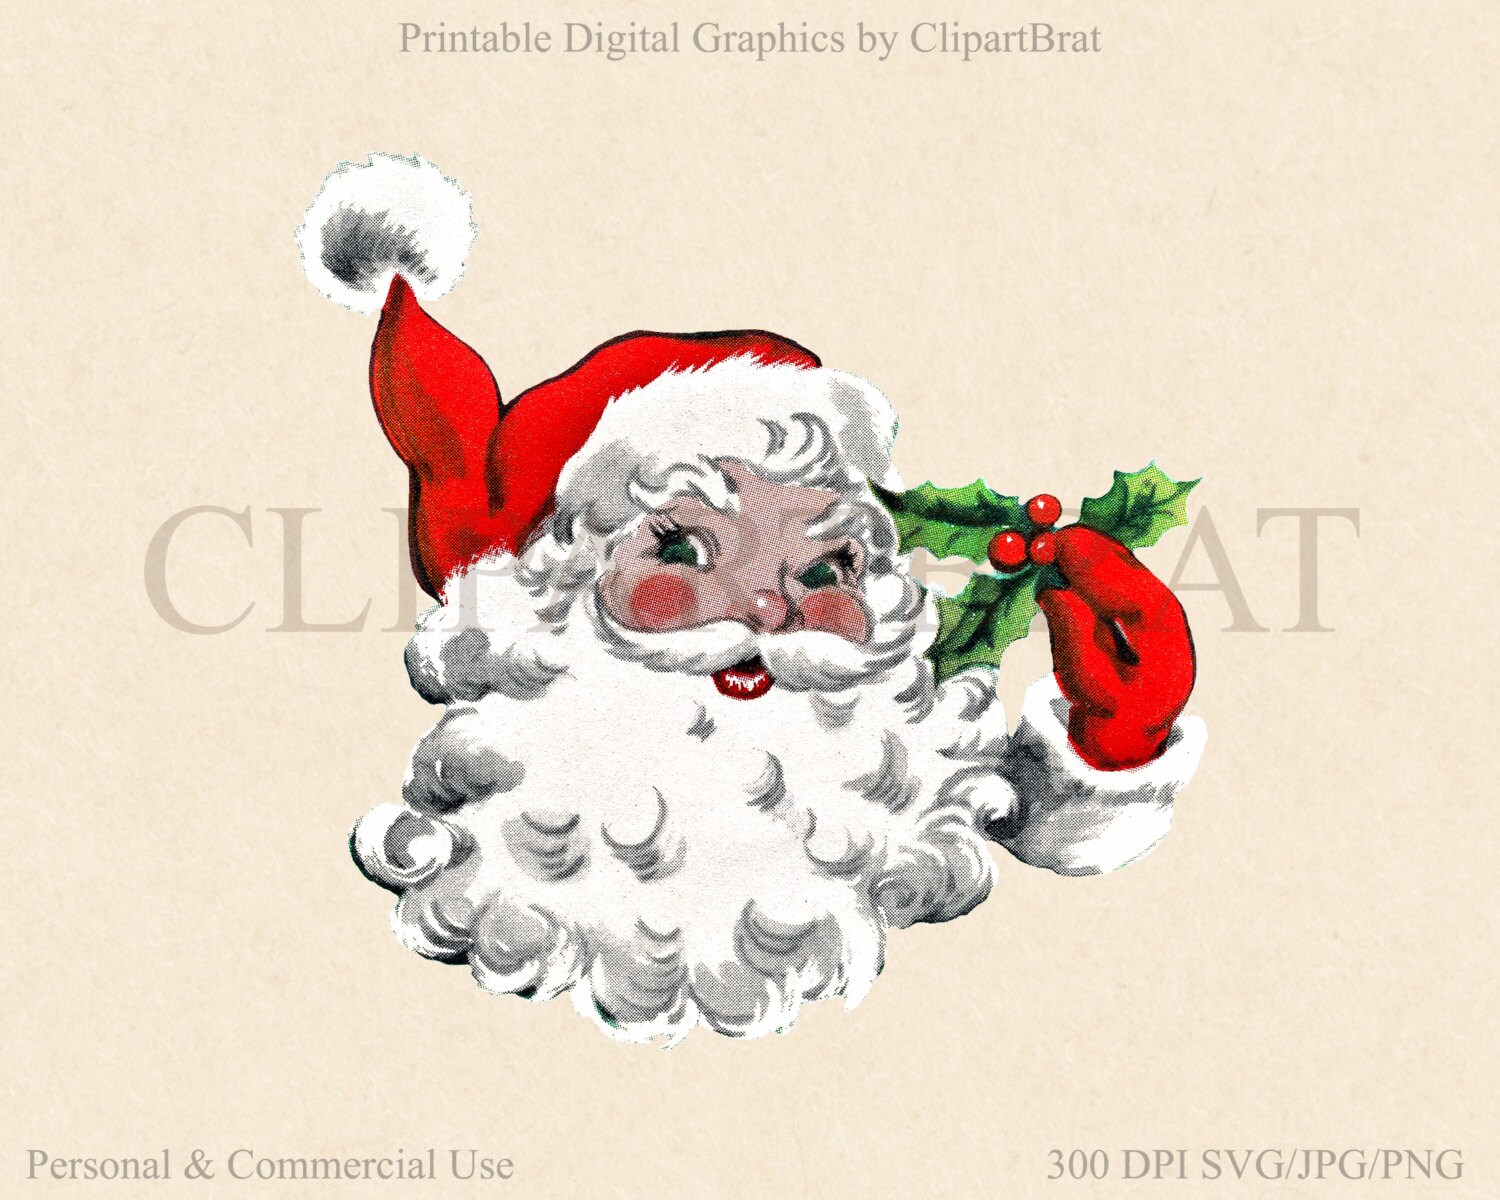 Download RETRO CHRISTMAS Clipart Commercial Use Clipart Santa Claus ...